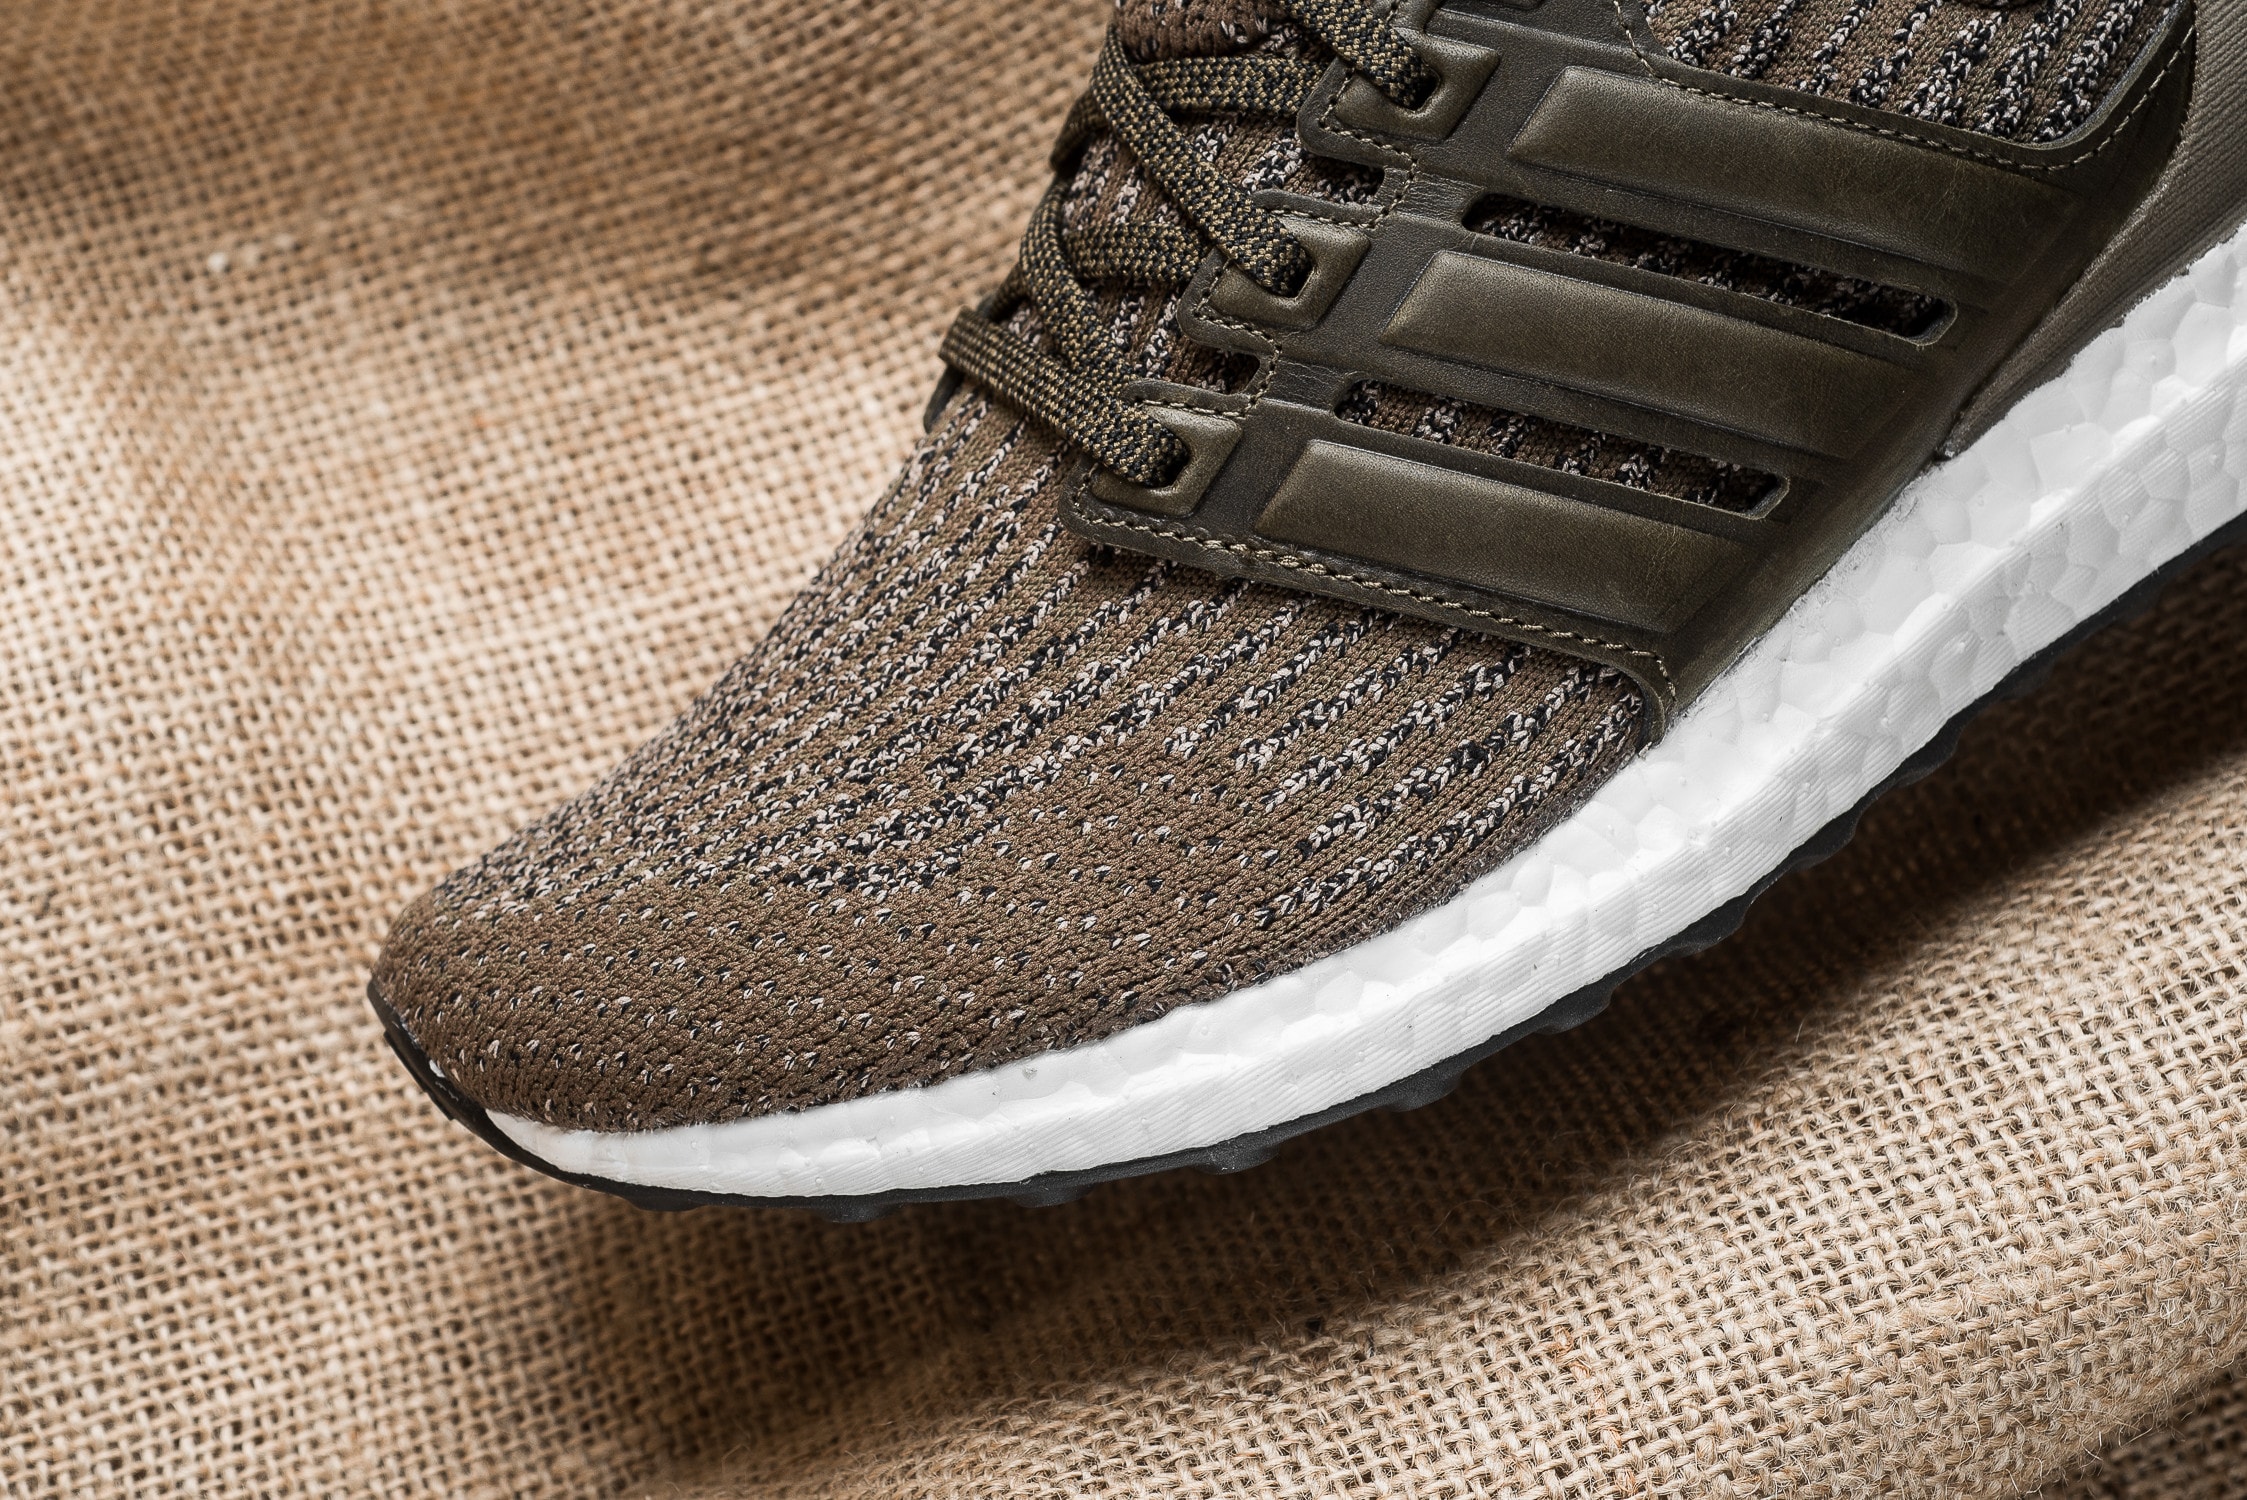 adidas UltraBOOST 3.0 “Trace Olive” Closer Look